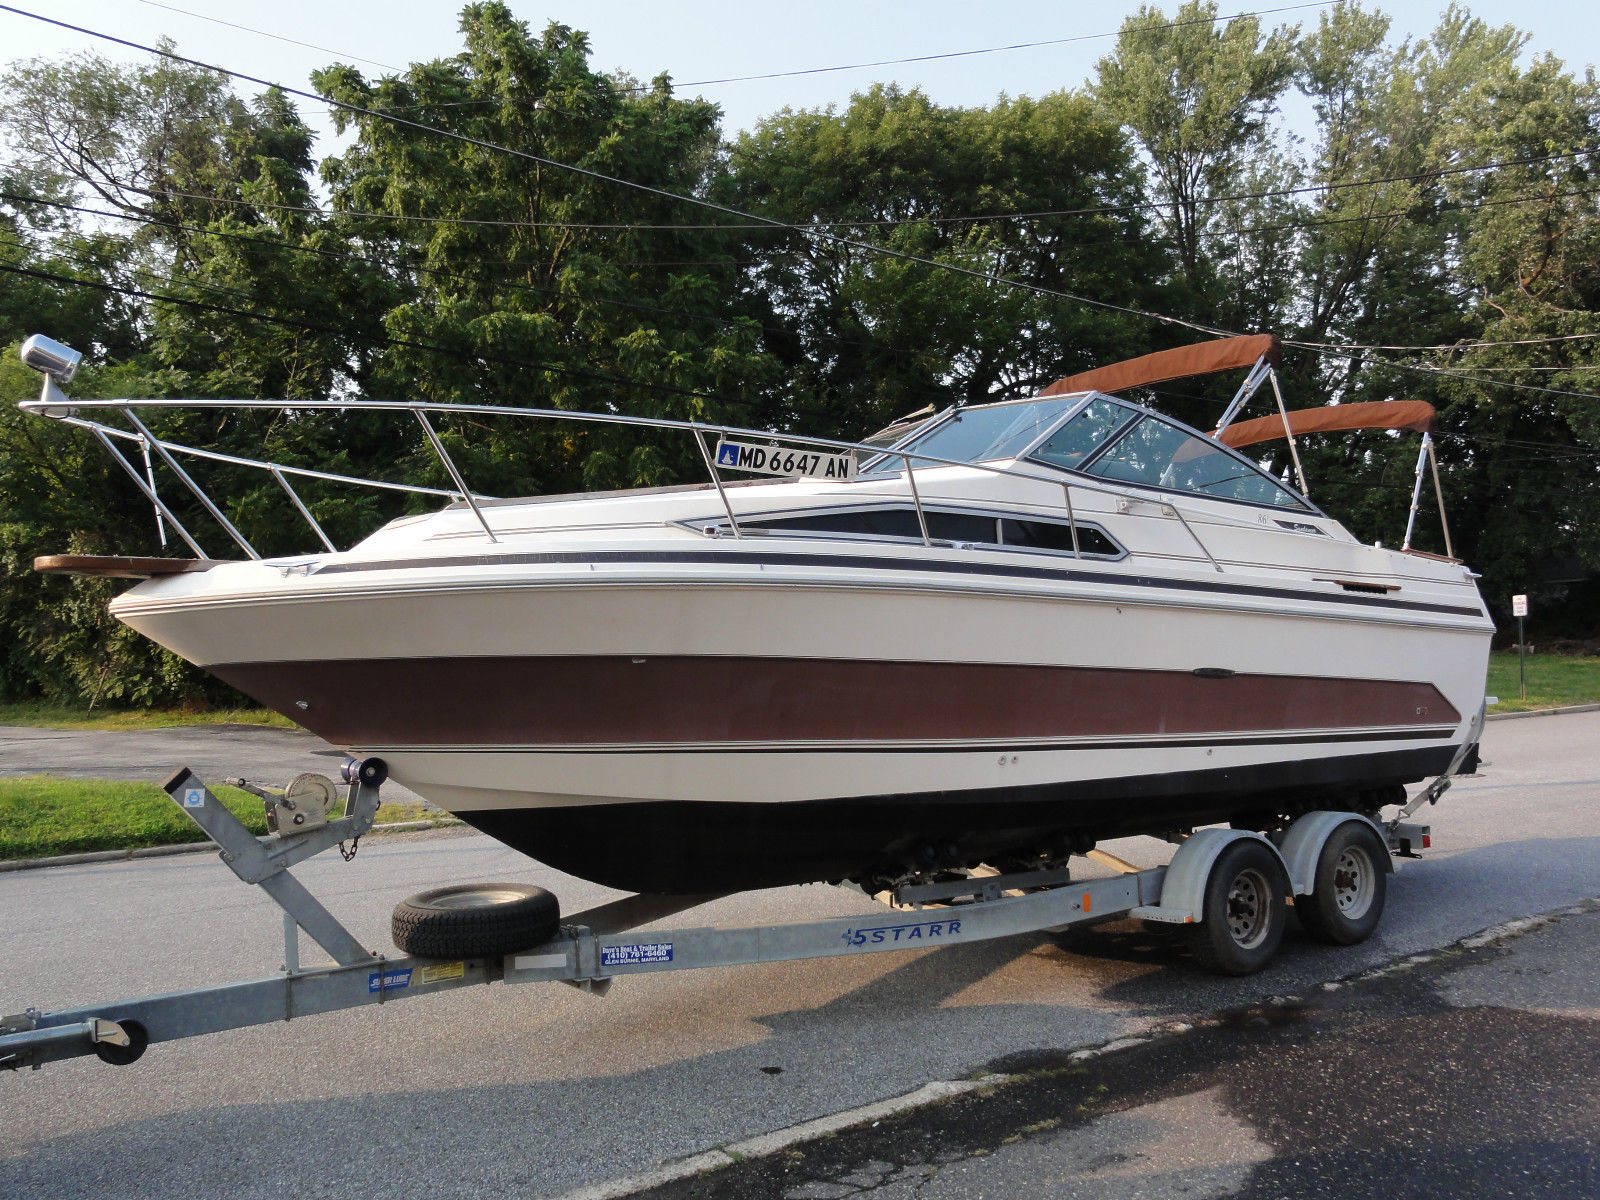 Sea Ray 250 Sundancer 1986 for sale for $500 - Boats-from ...